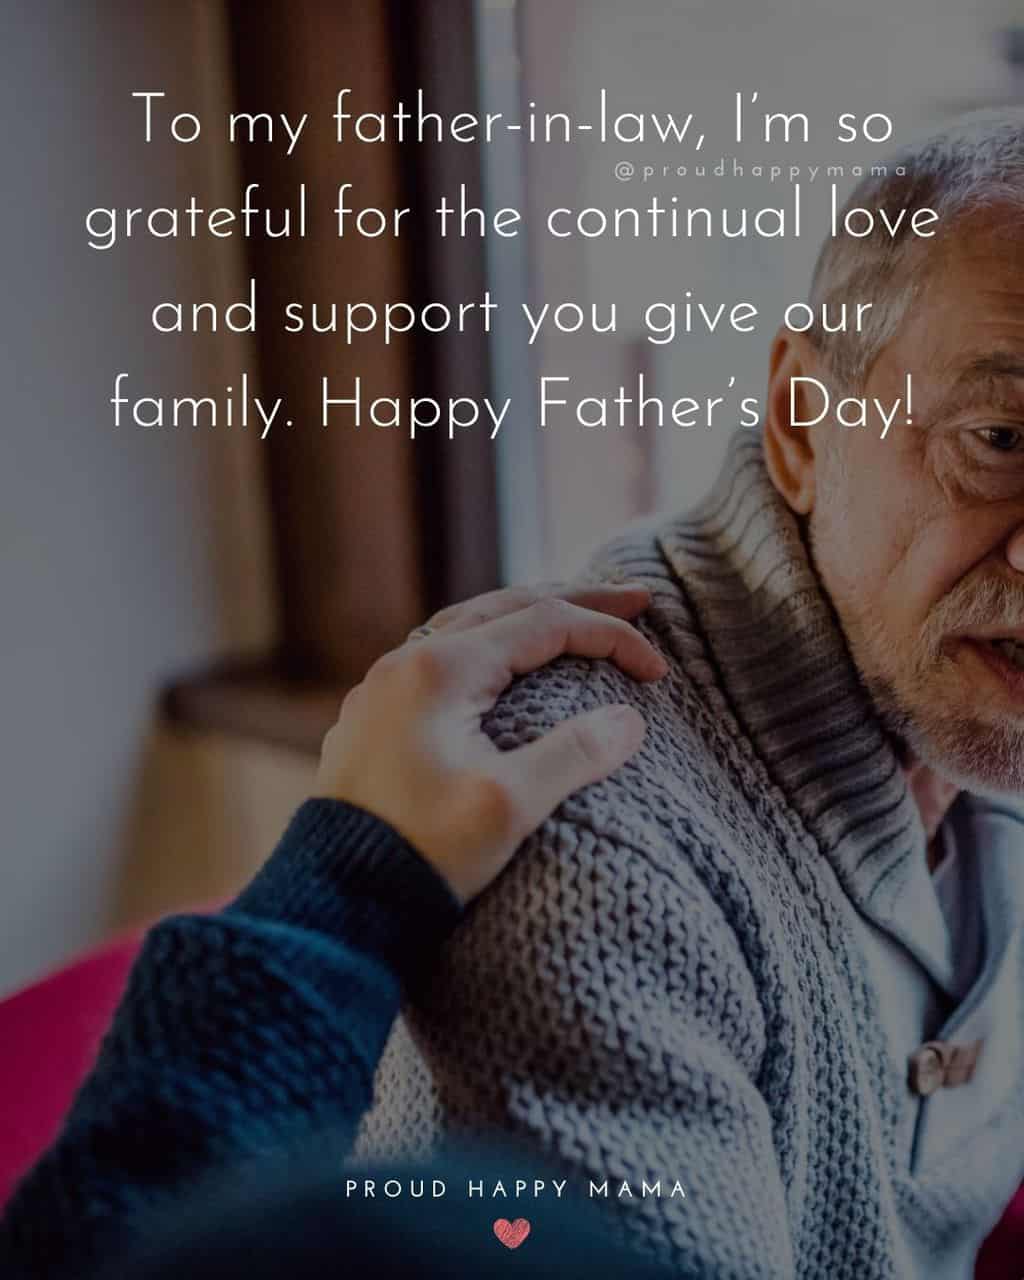 Happy Fathers Day Quotes For Father In Law - To my father in law, I’m so grateful for the continual love and support you give